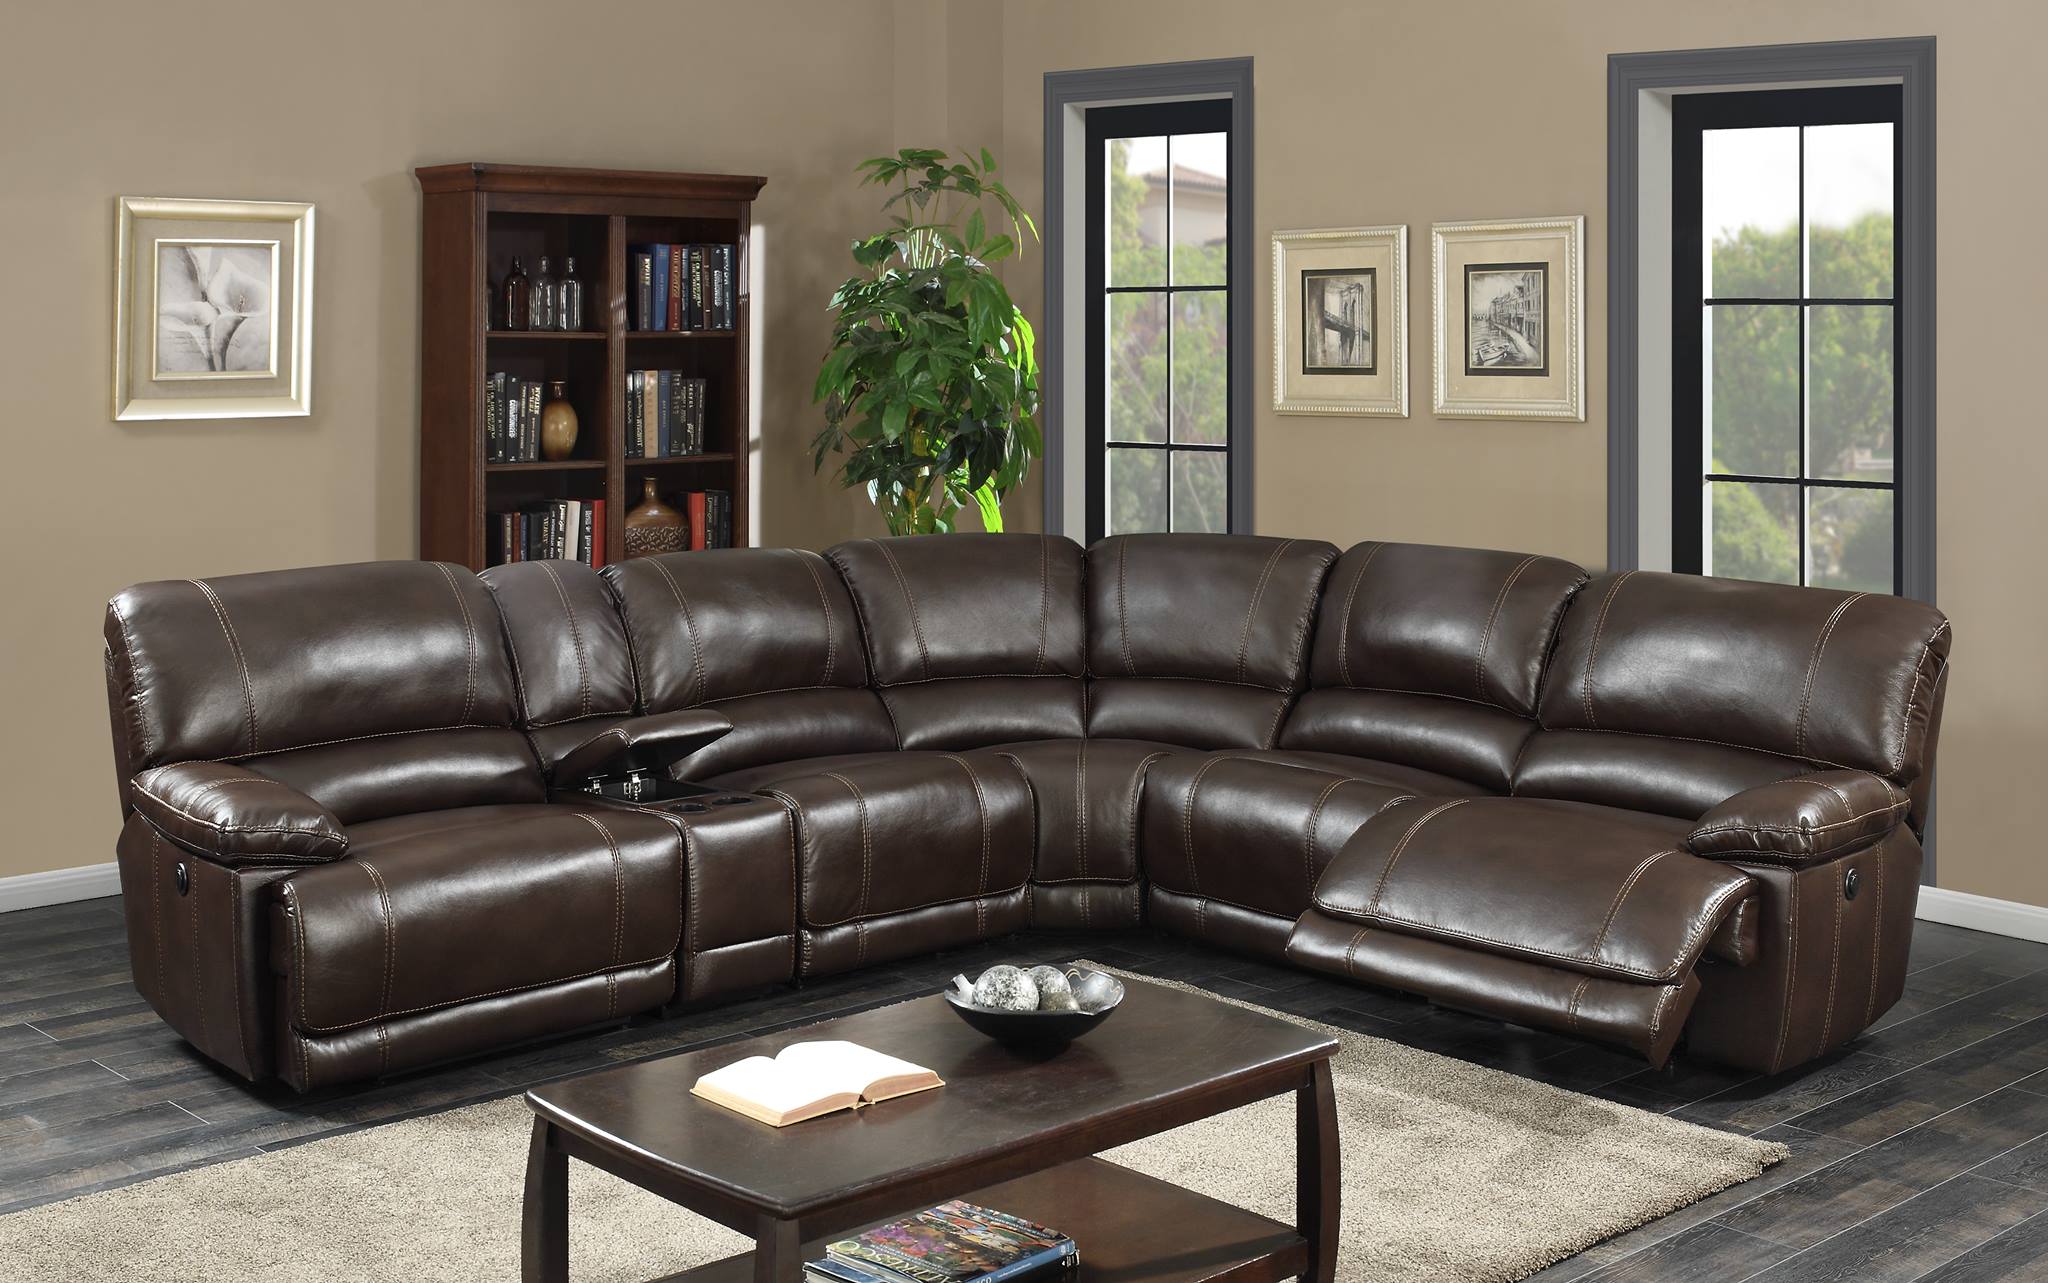 Venice Leather Gel Reclining Sectional, Brown Leather Reclining Sectional